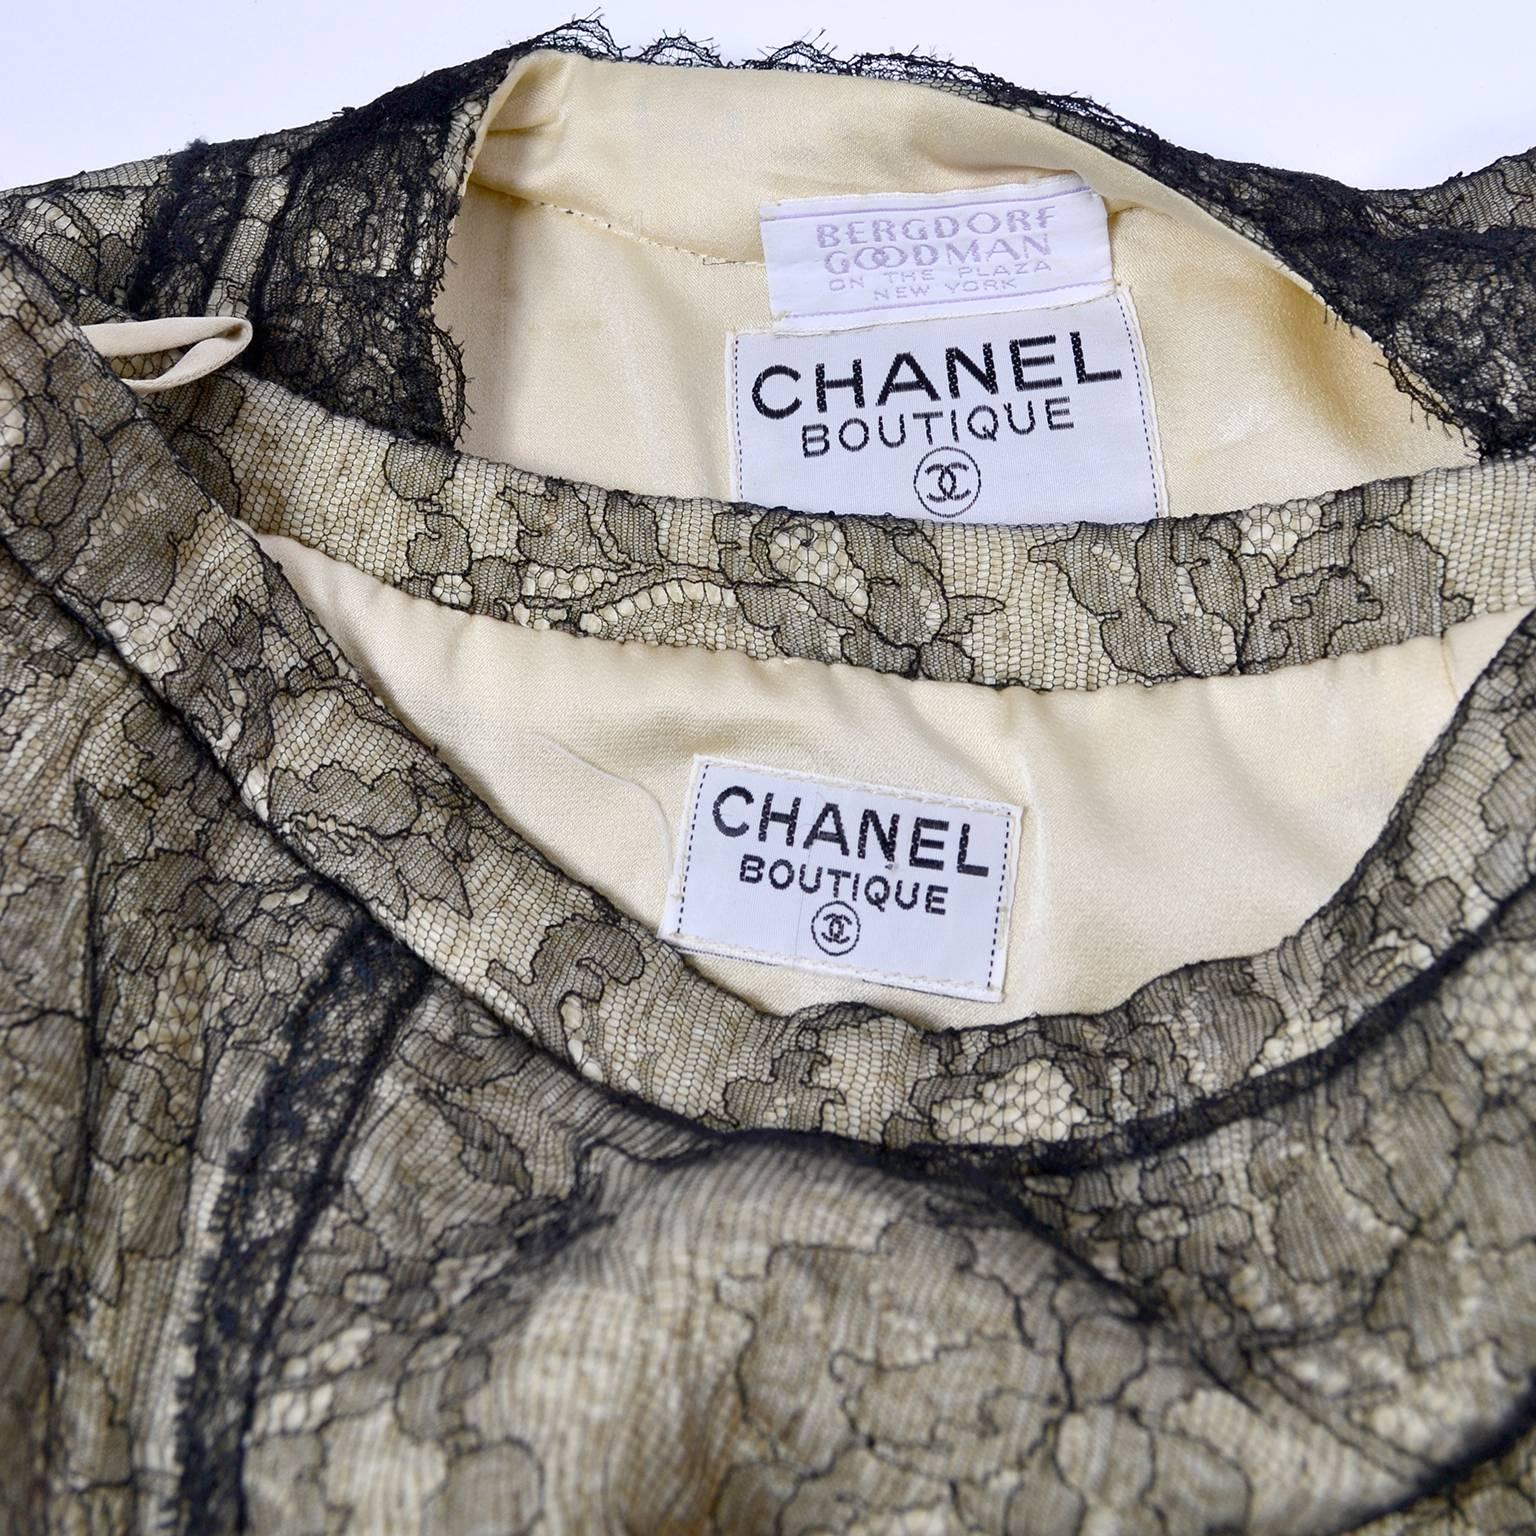 1983 Chanel Suit Skirt & Jacket in Cream Tweed w Camellia Chantilly Lace Overlay 2